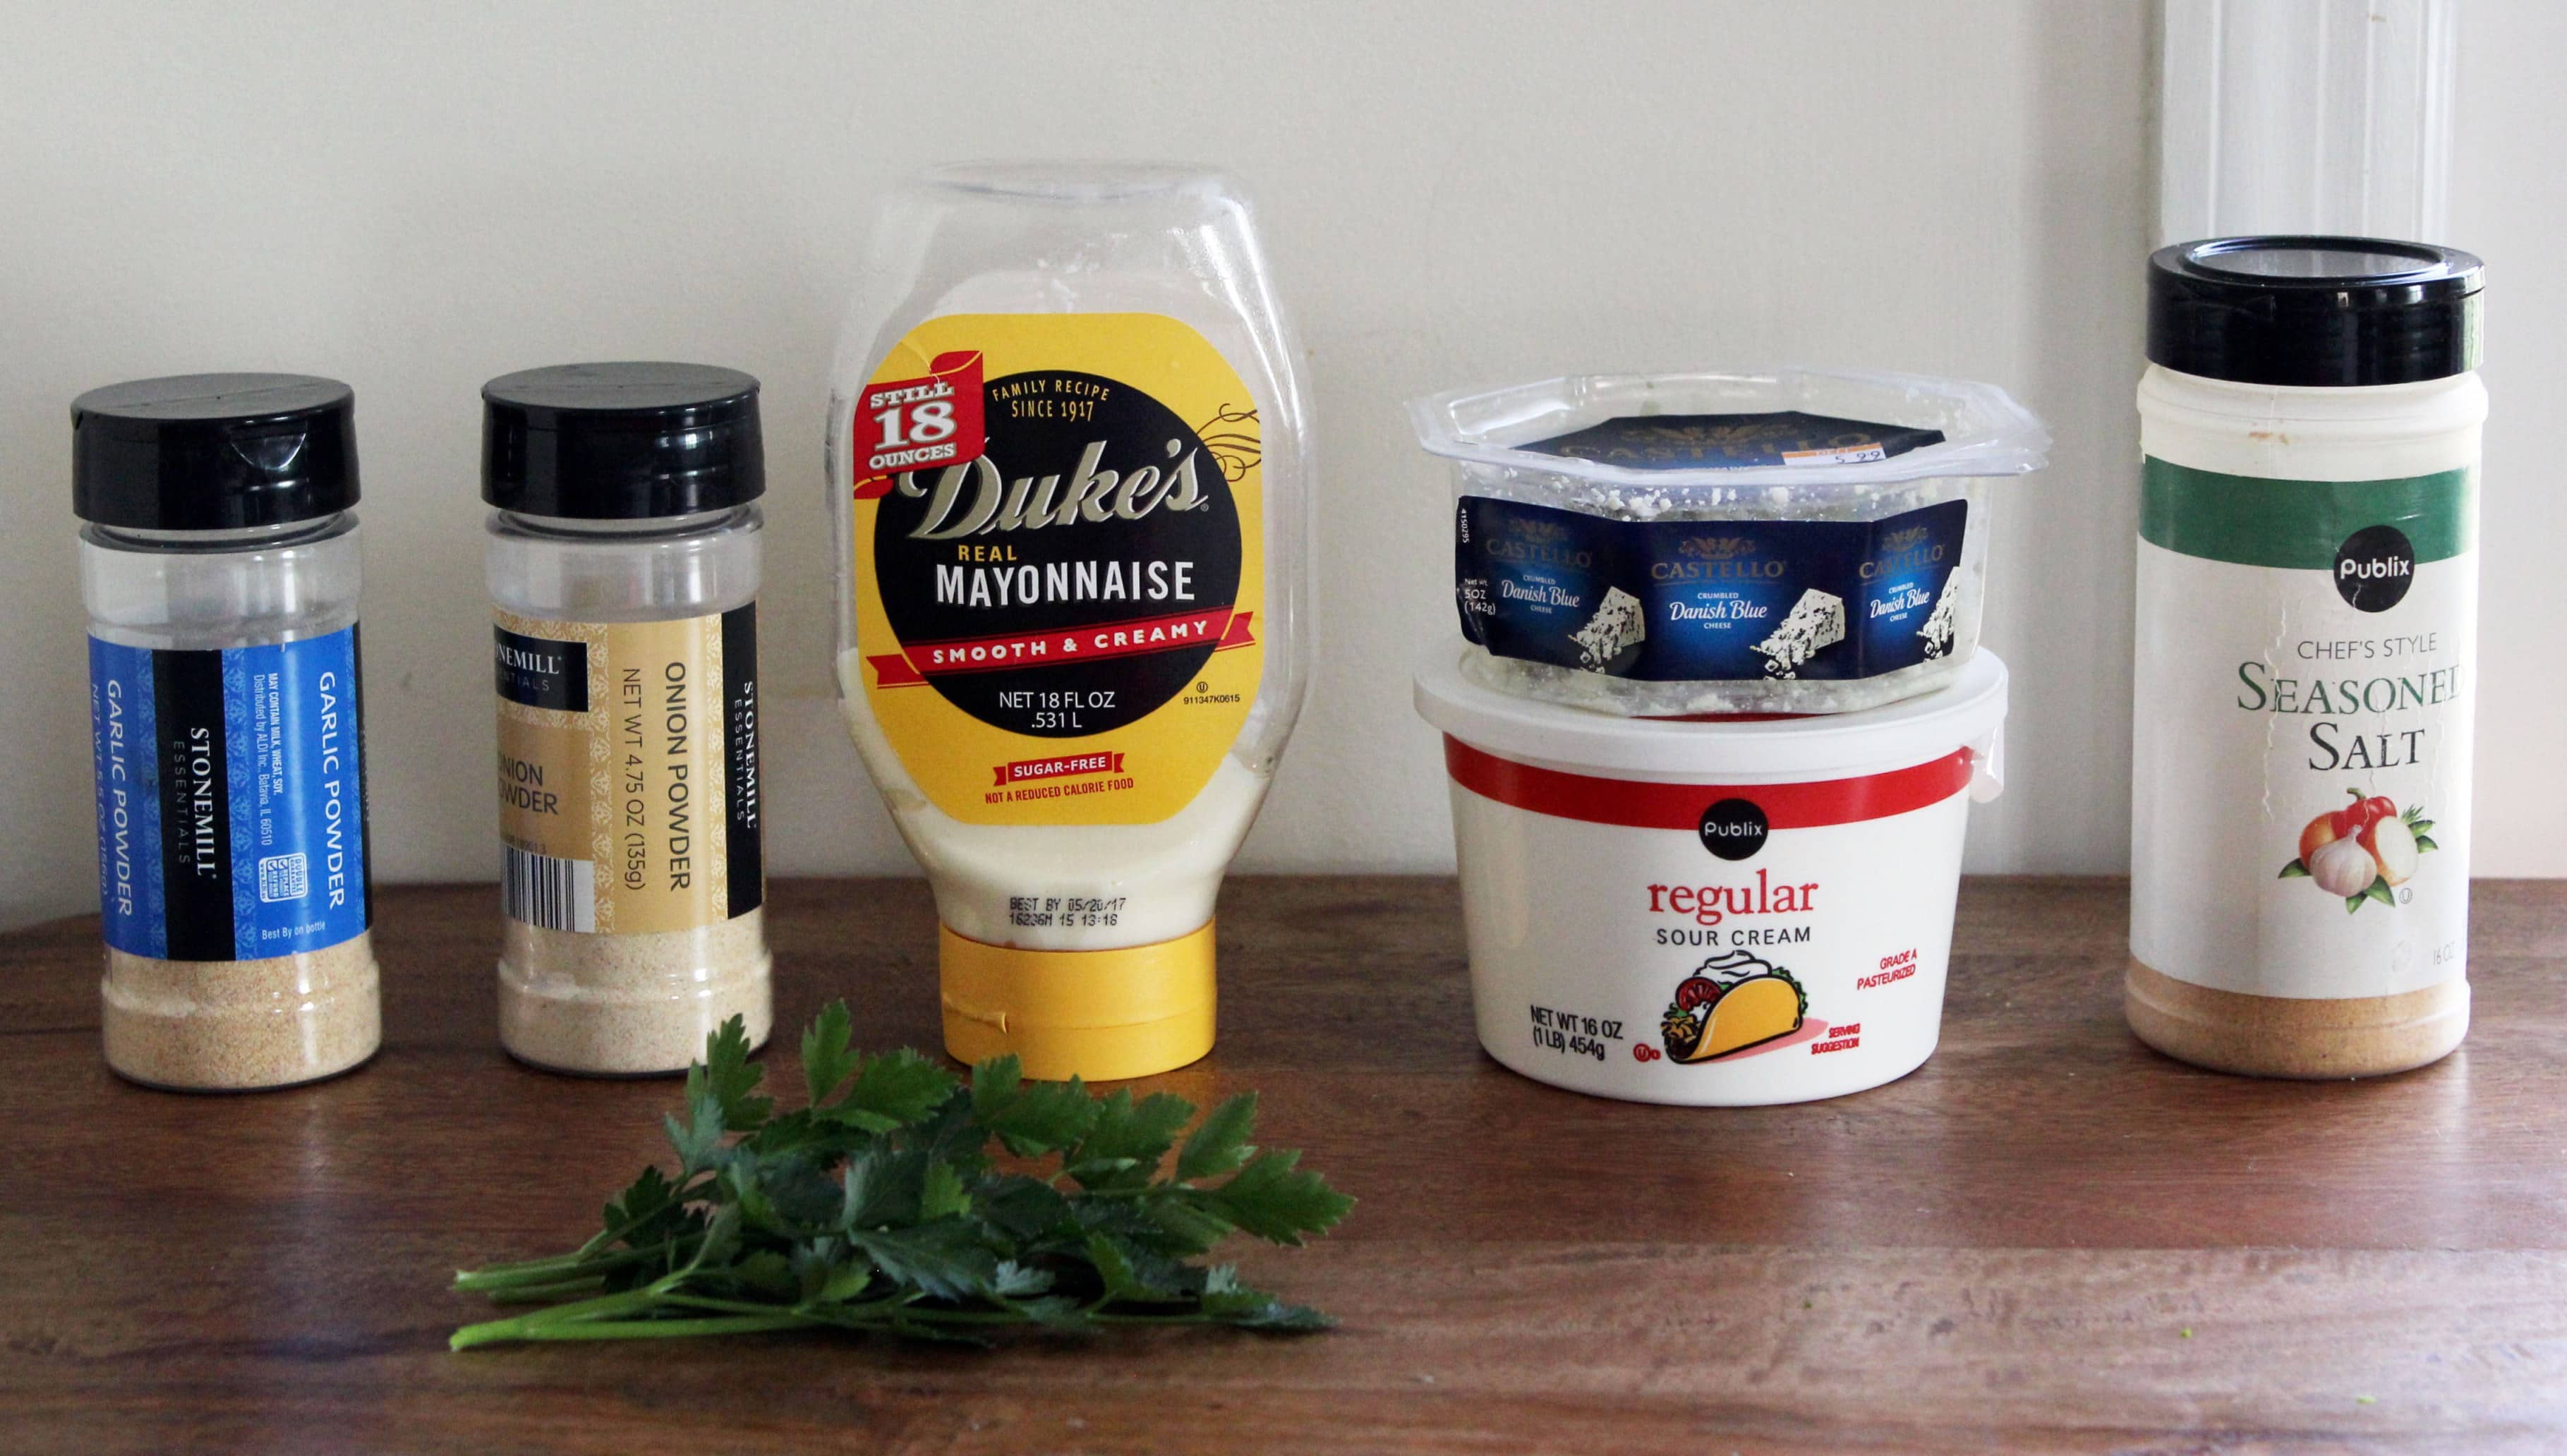 ingredients for homemade ranch dip with blue cheese.